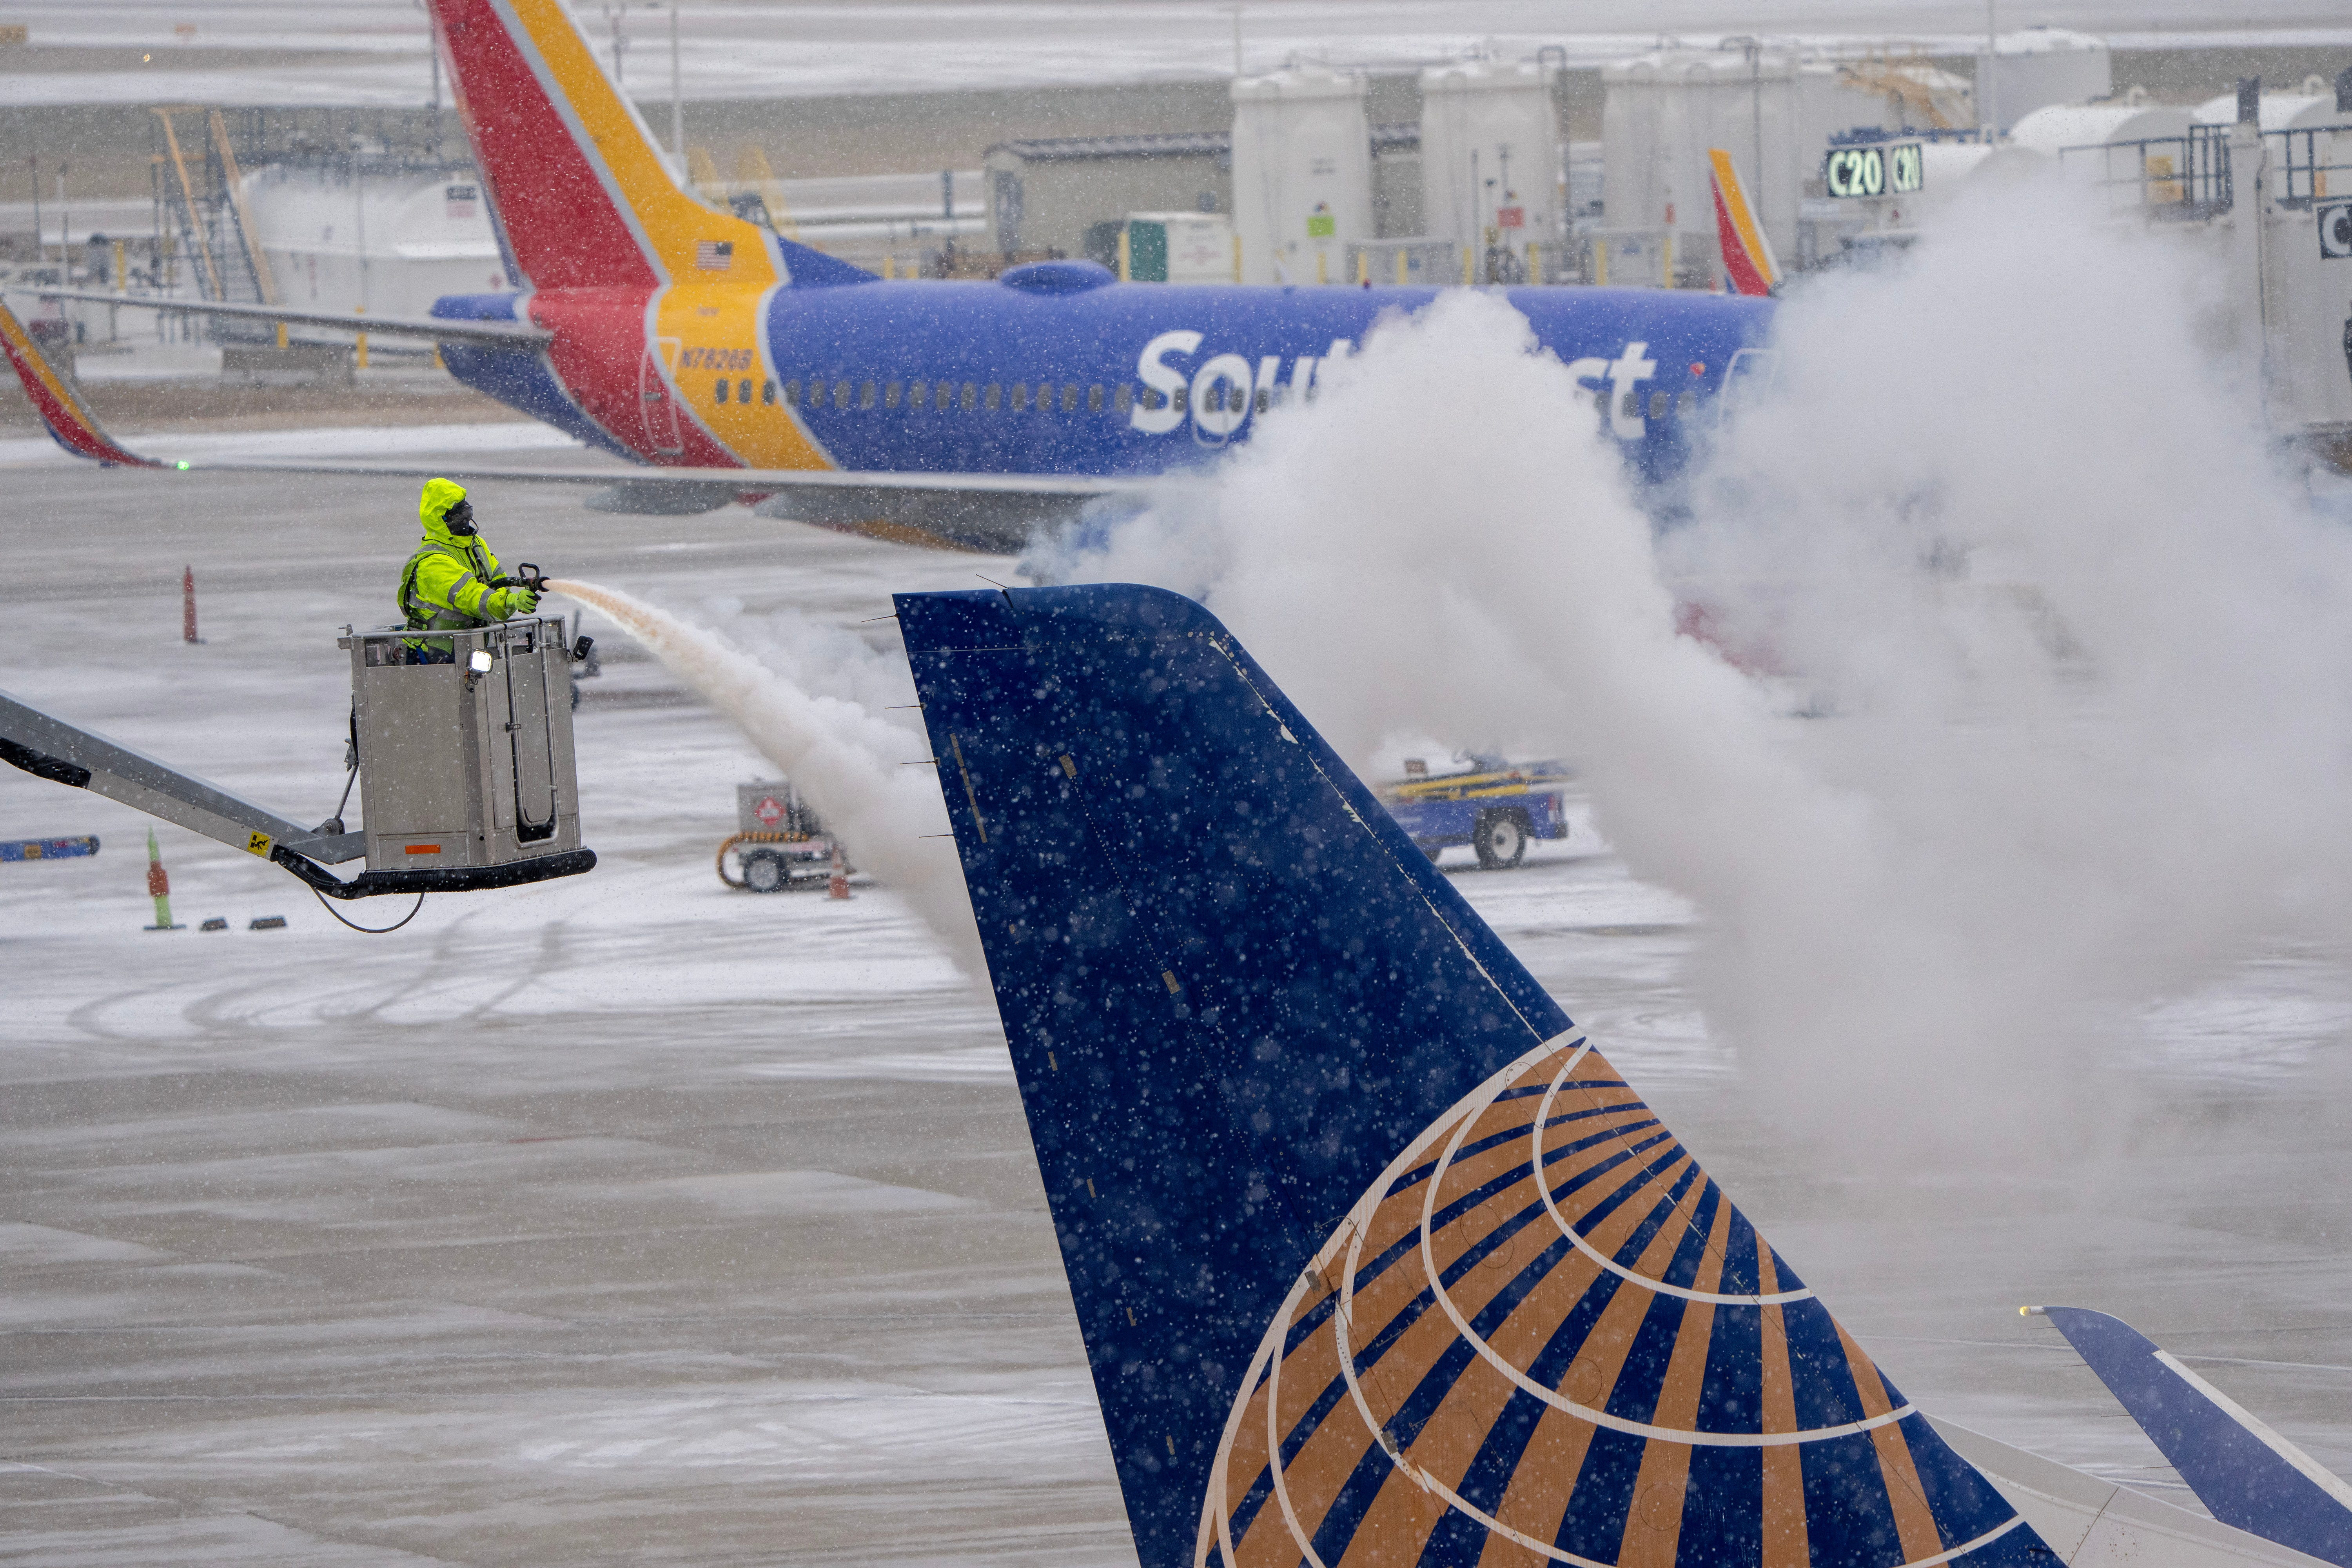 Airlines scrap 4,400 U.S. flights as winter storm disrupts holiday travel